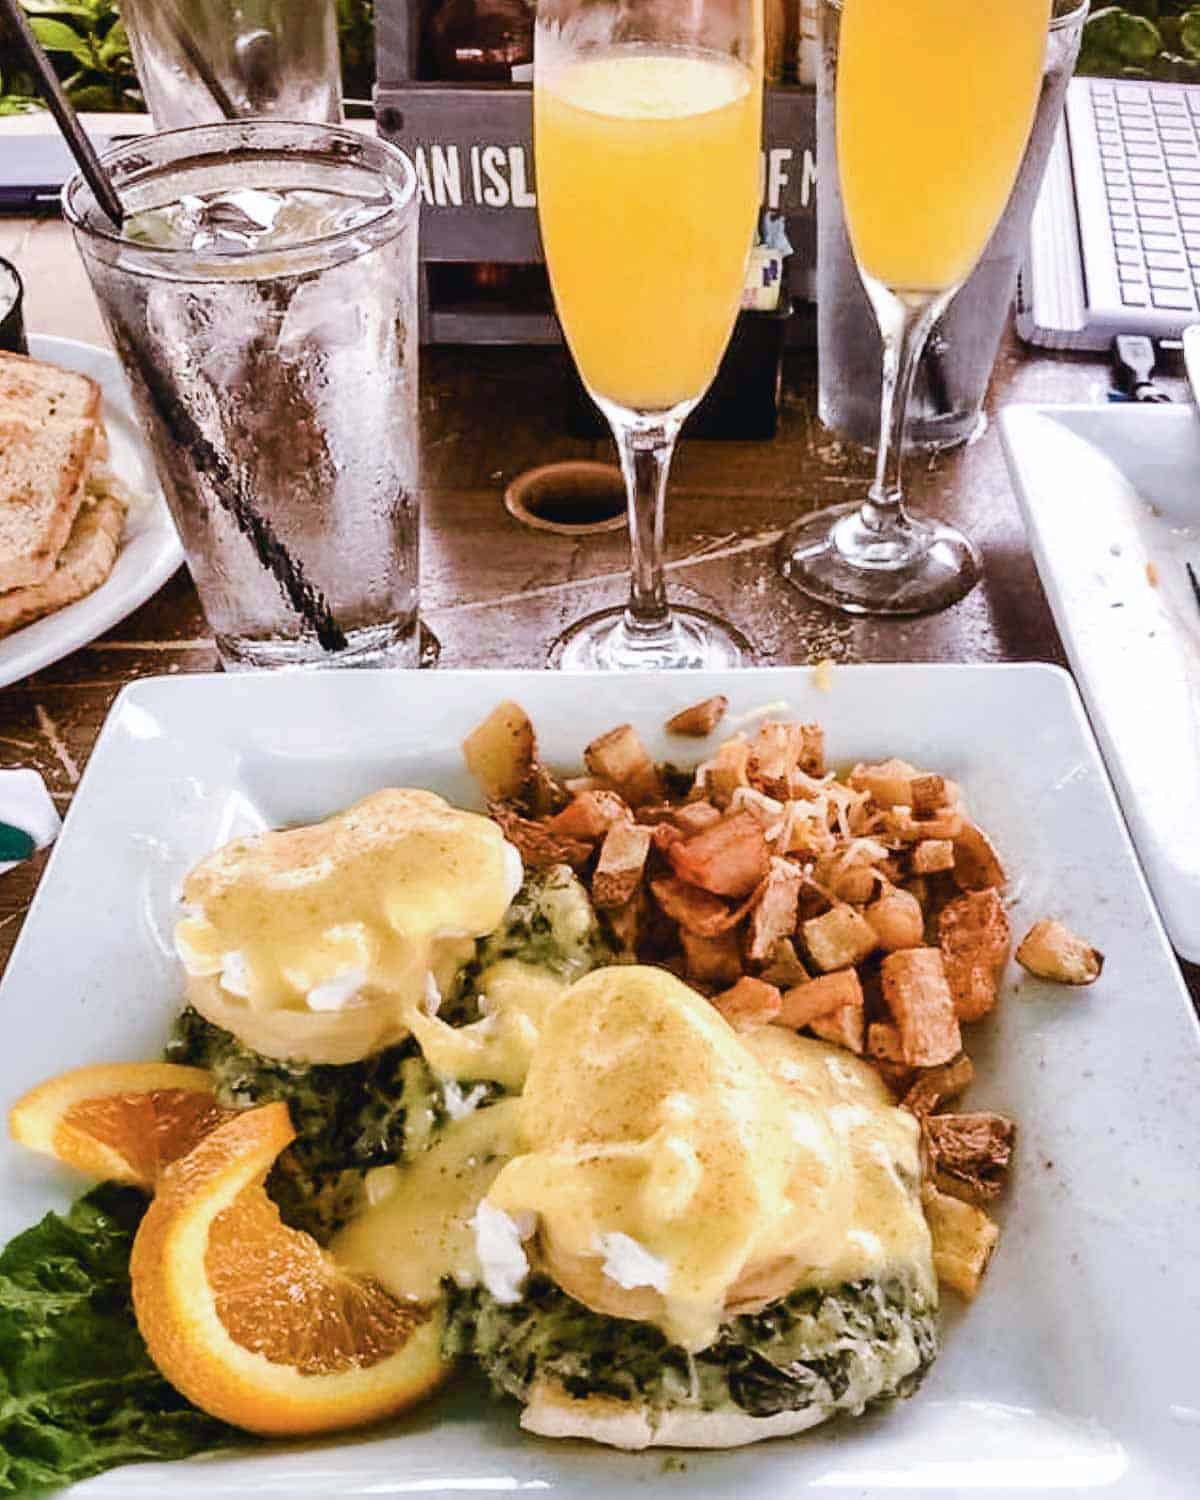 Eggs benedict with potatoes and mimosas at Buzzards in Key Largo.